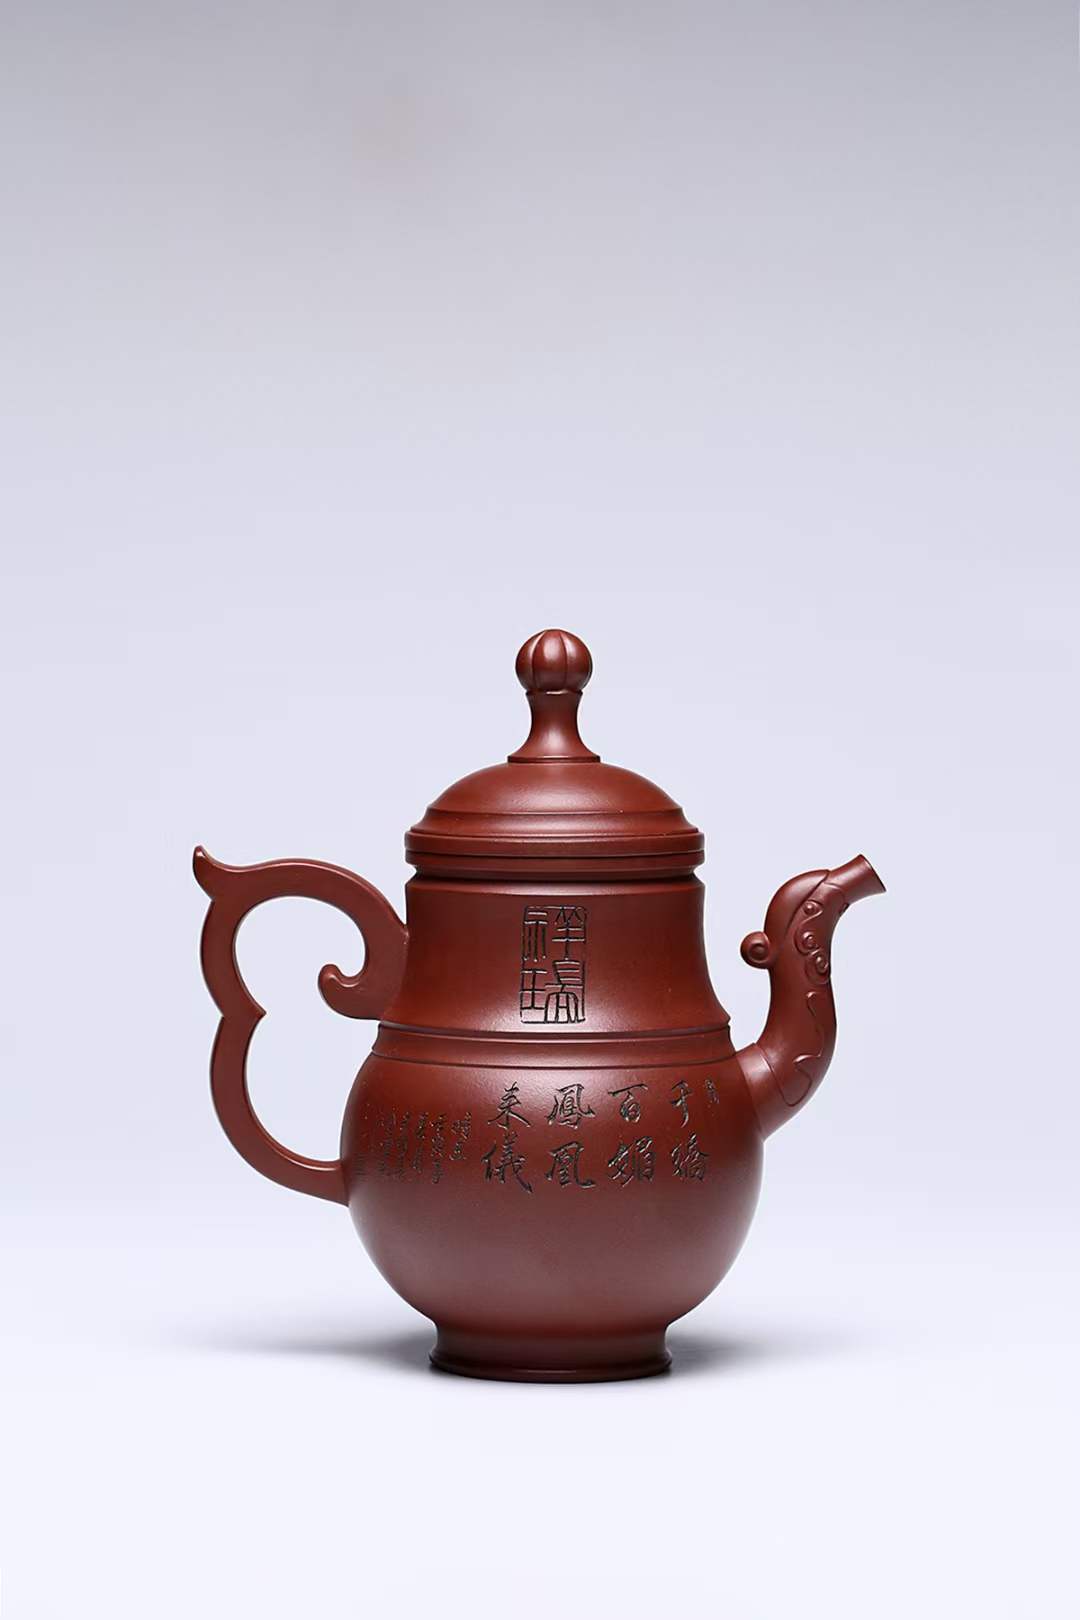 [Collection grade] Fenglaiyi Zisha teapot in the bottom groove of the original mine